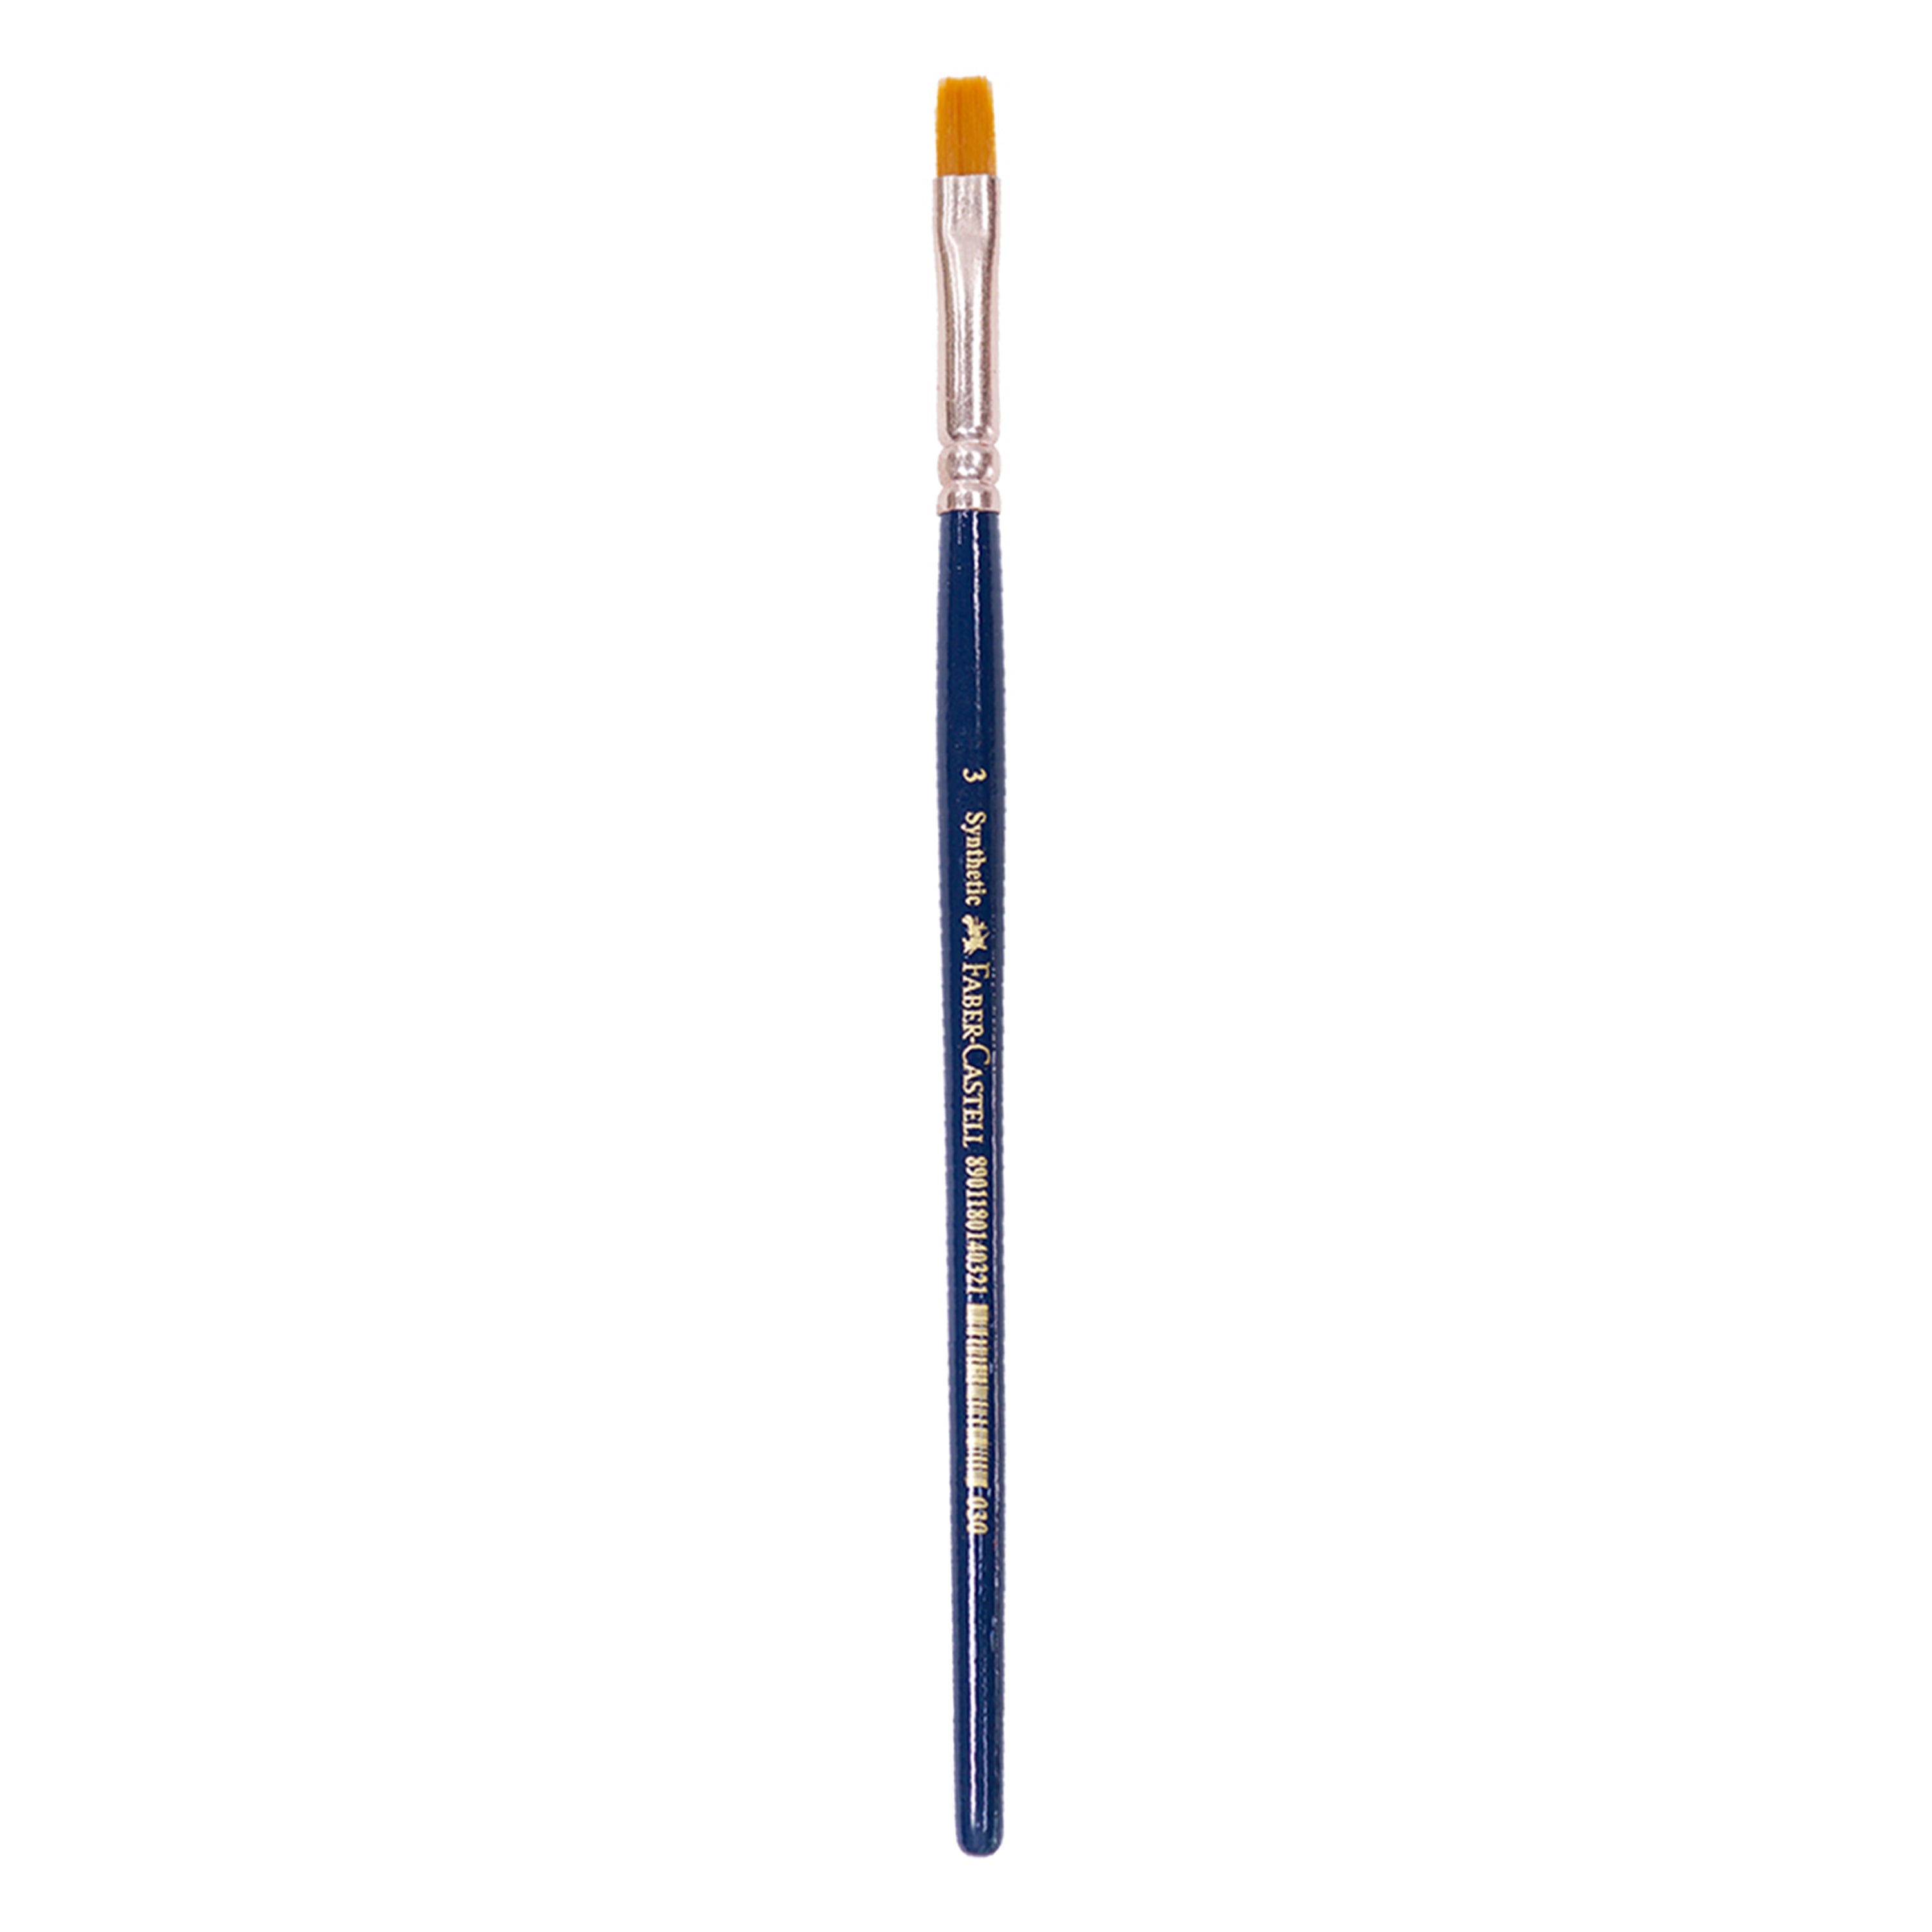 Faber Castell Paint Brush - Synthetic Hair Flat Size 3, 1pc